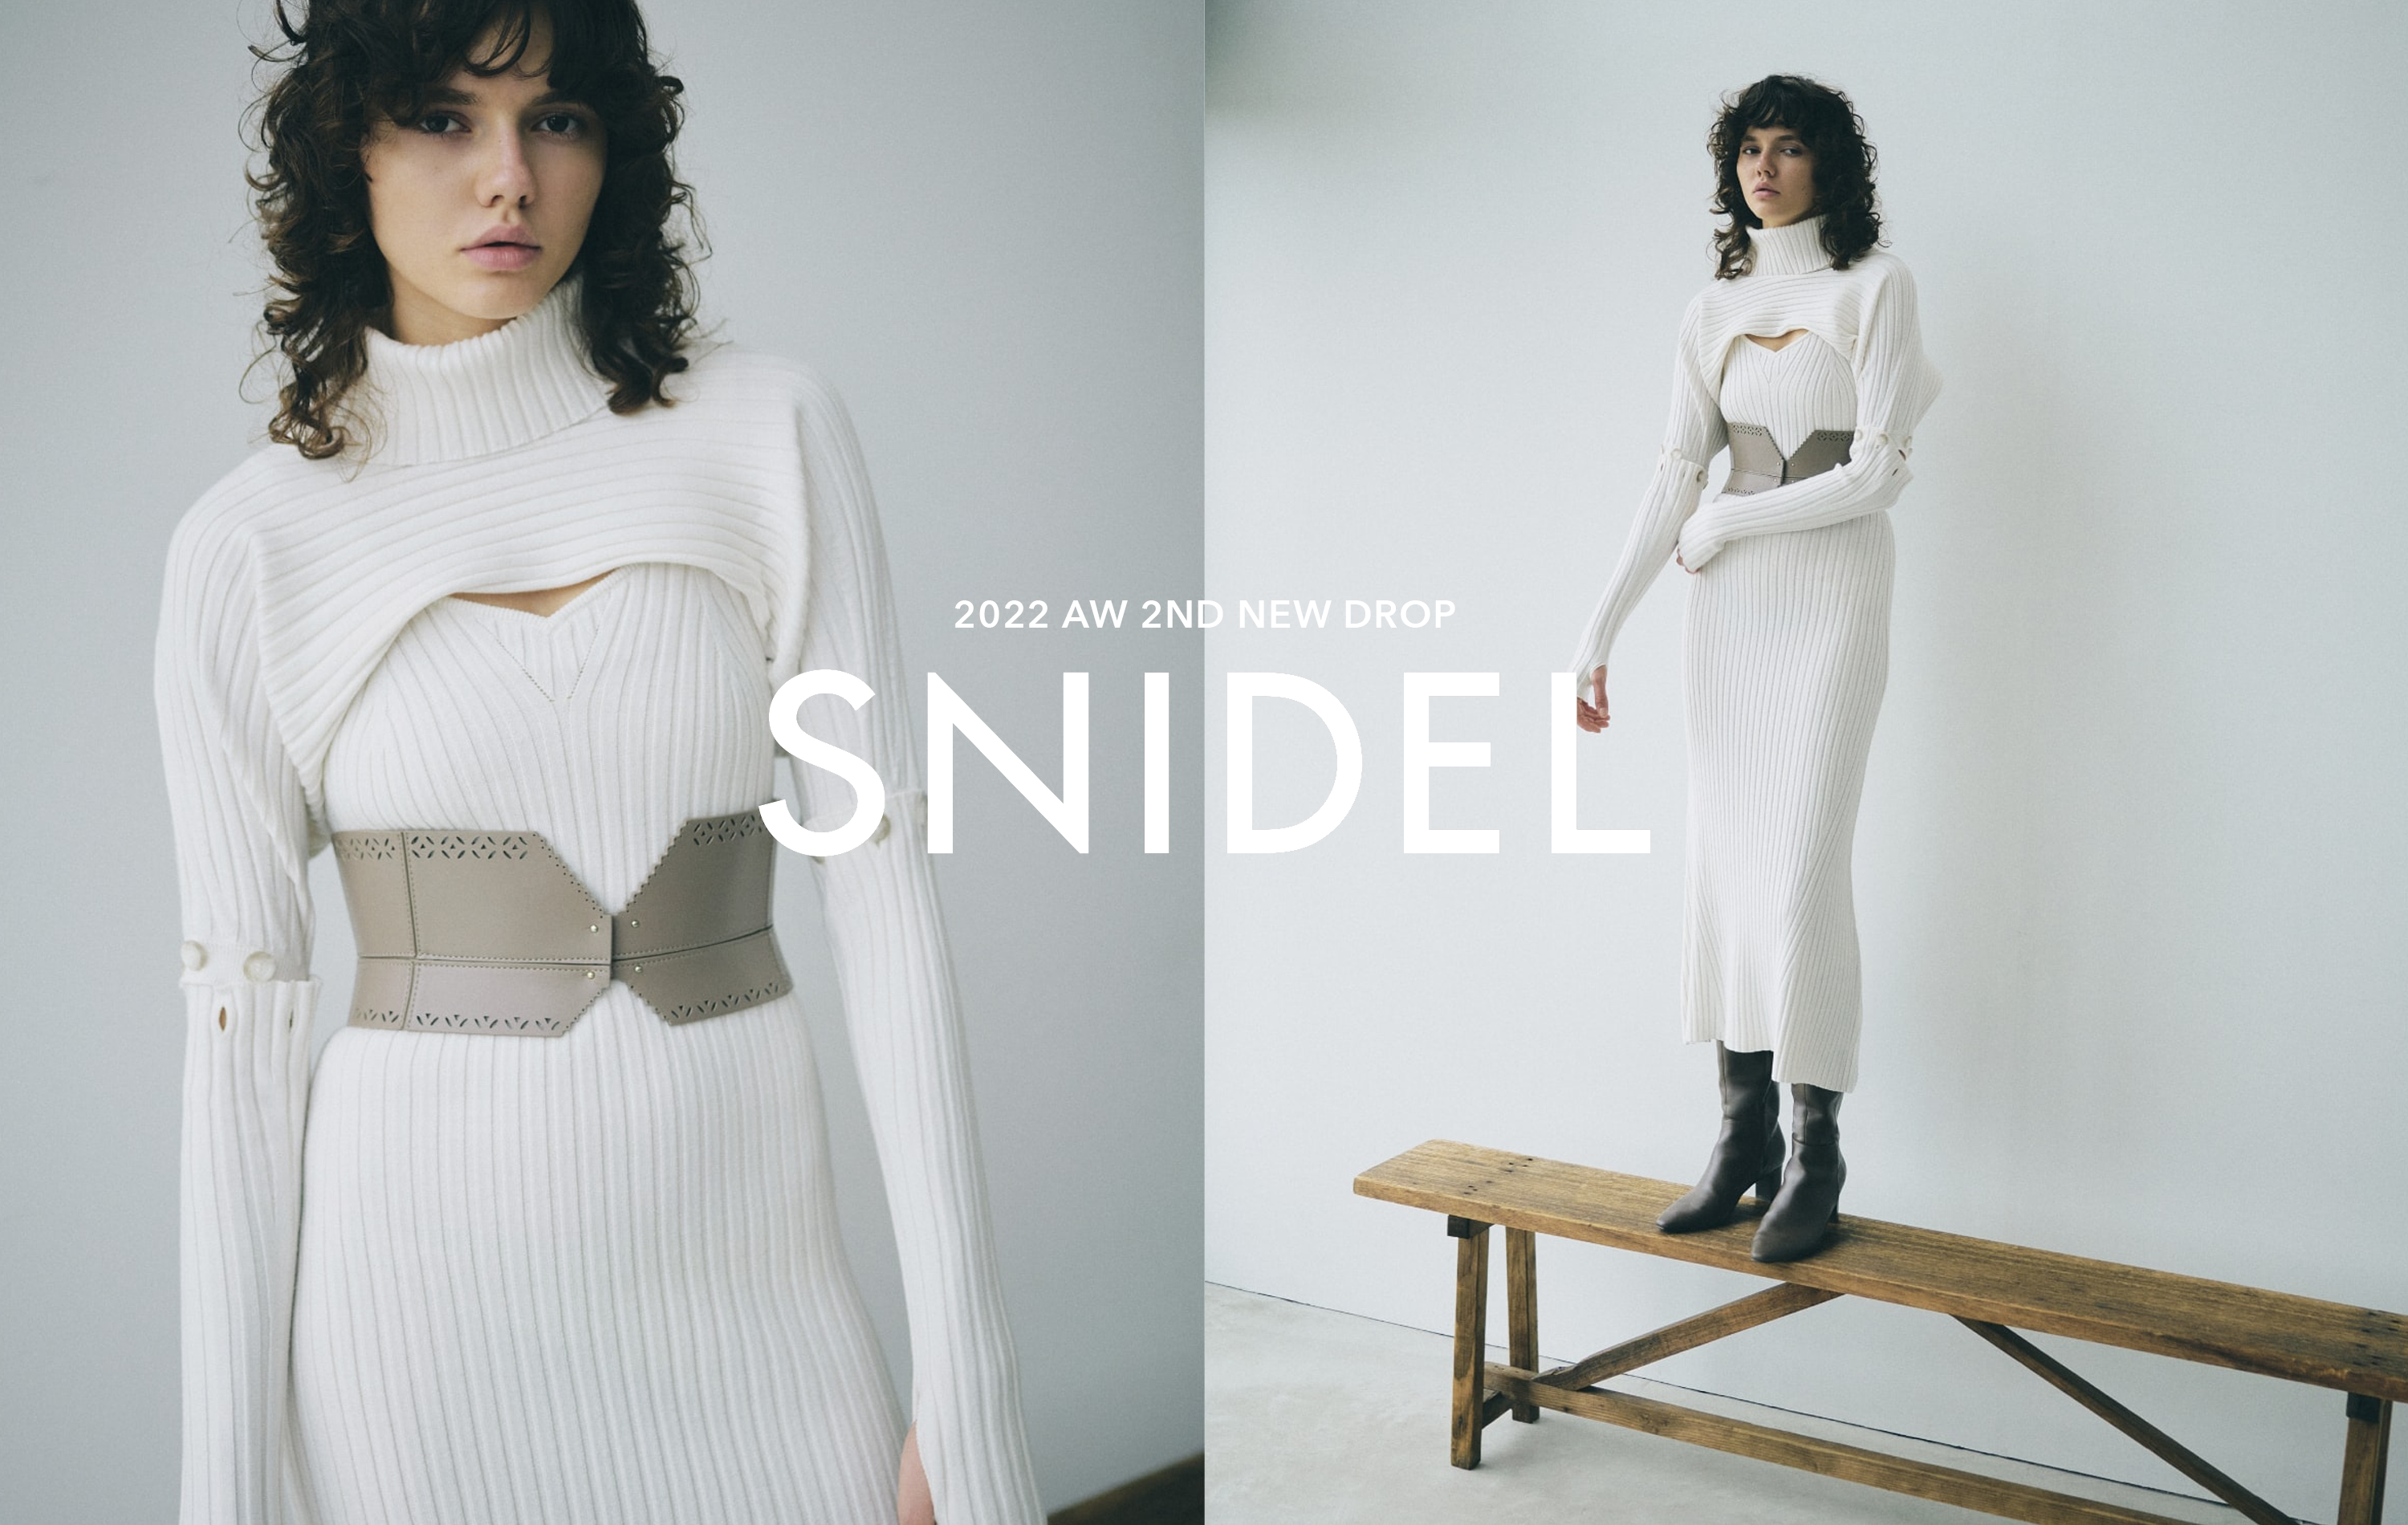 Buy SNIDEL USA 2022 AW 2nd NEW collection